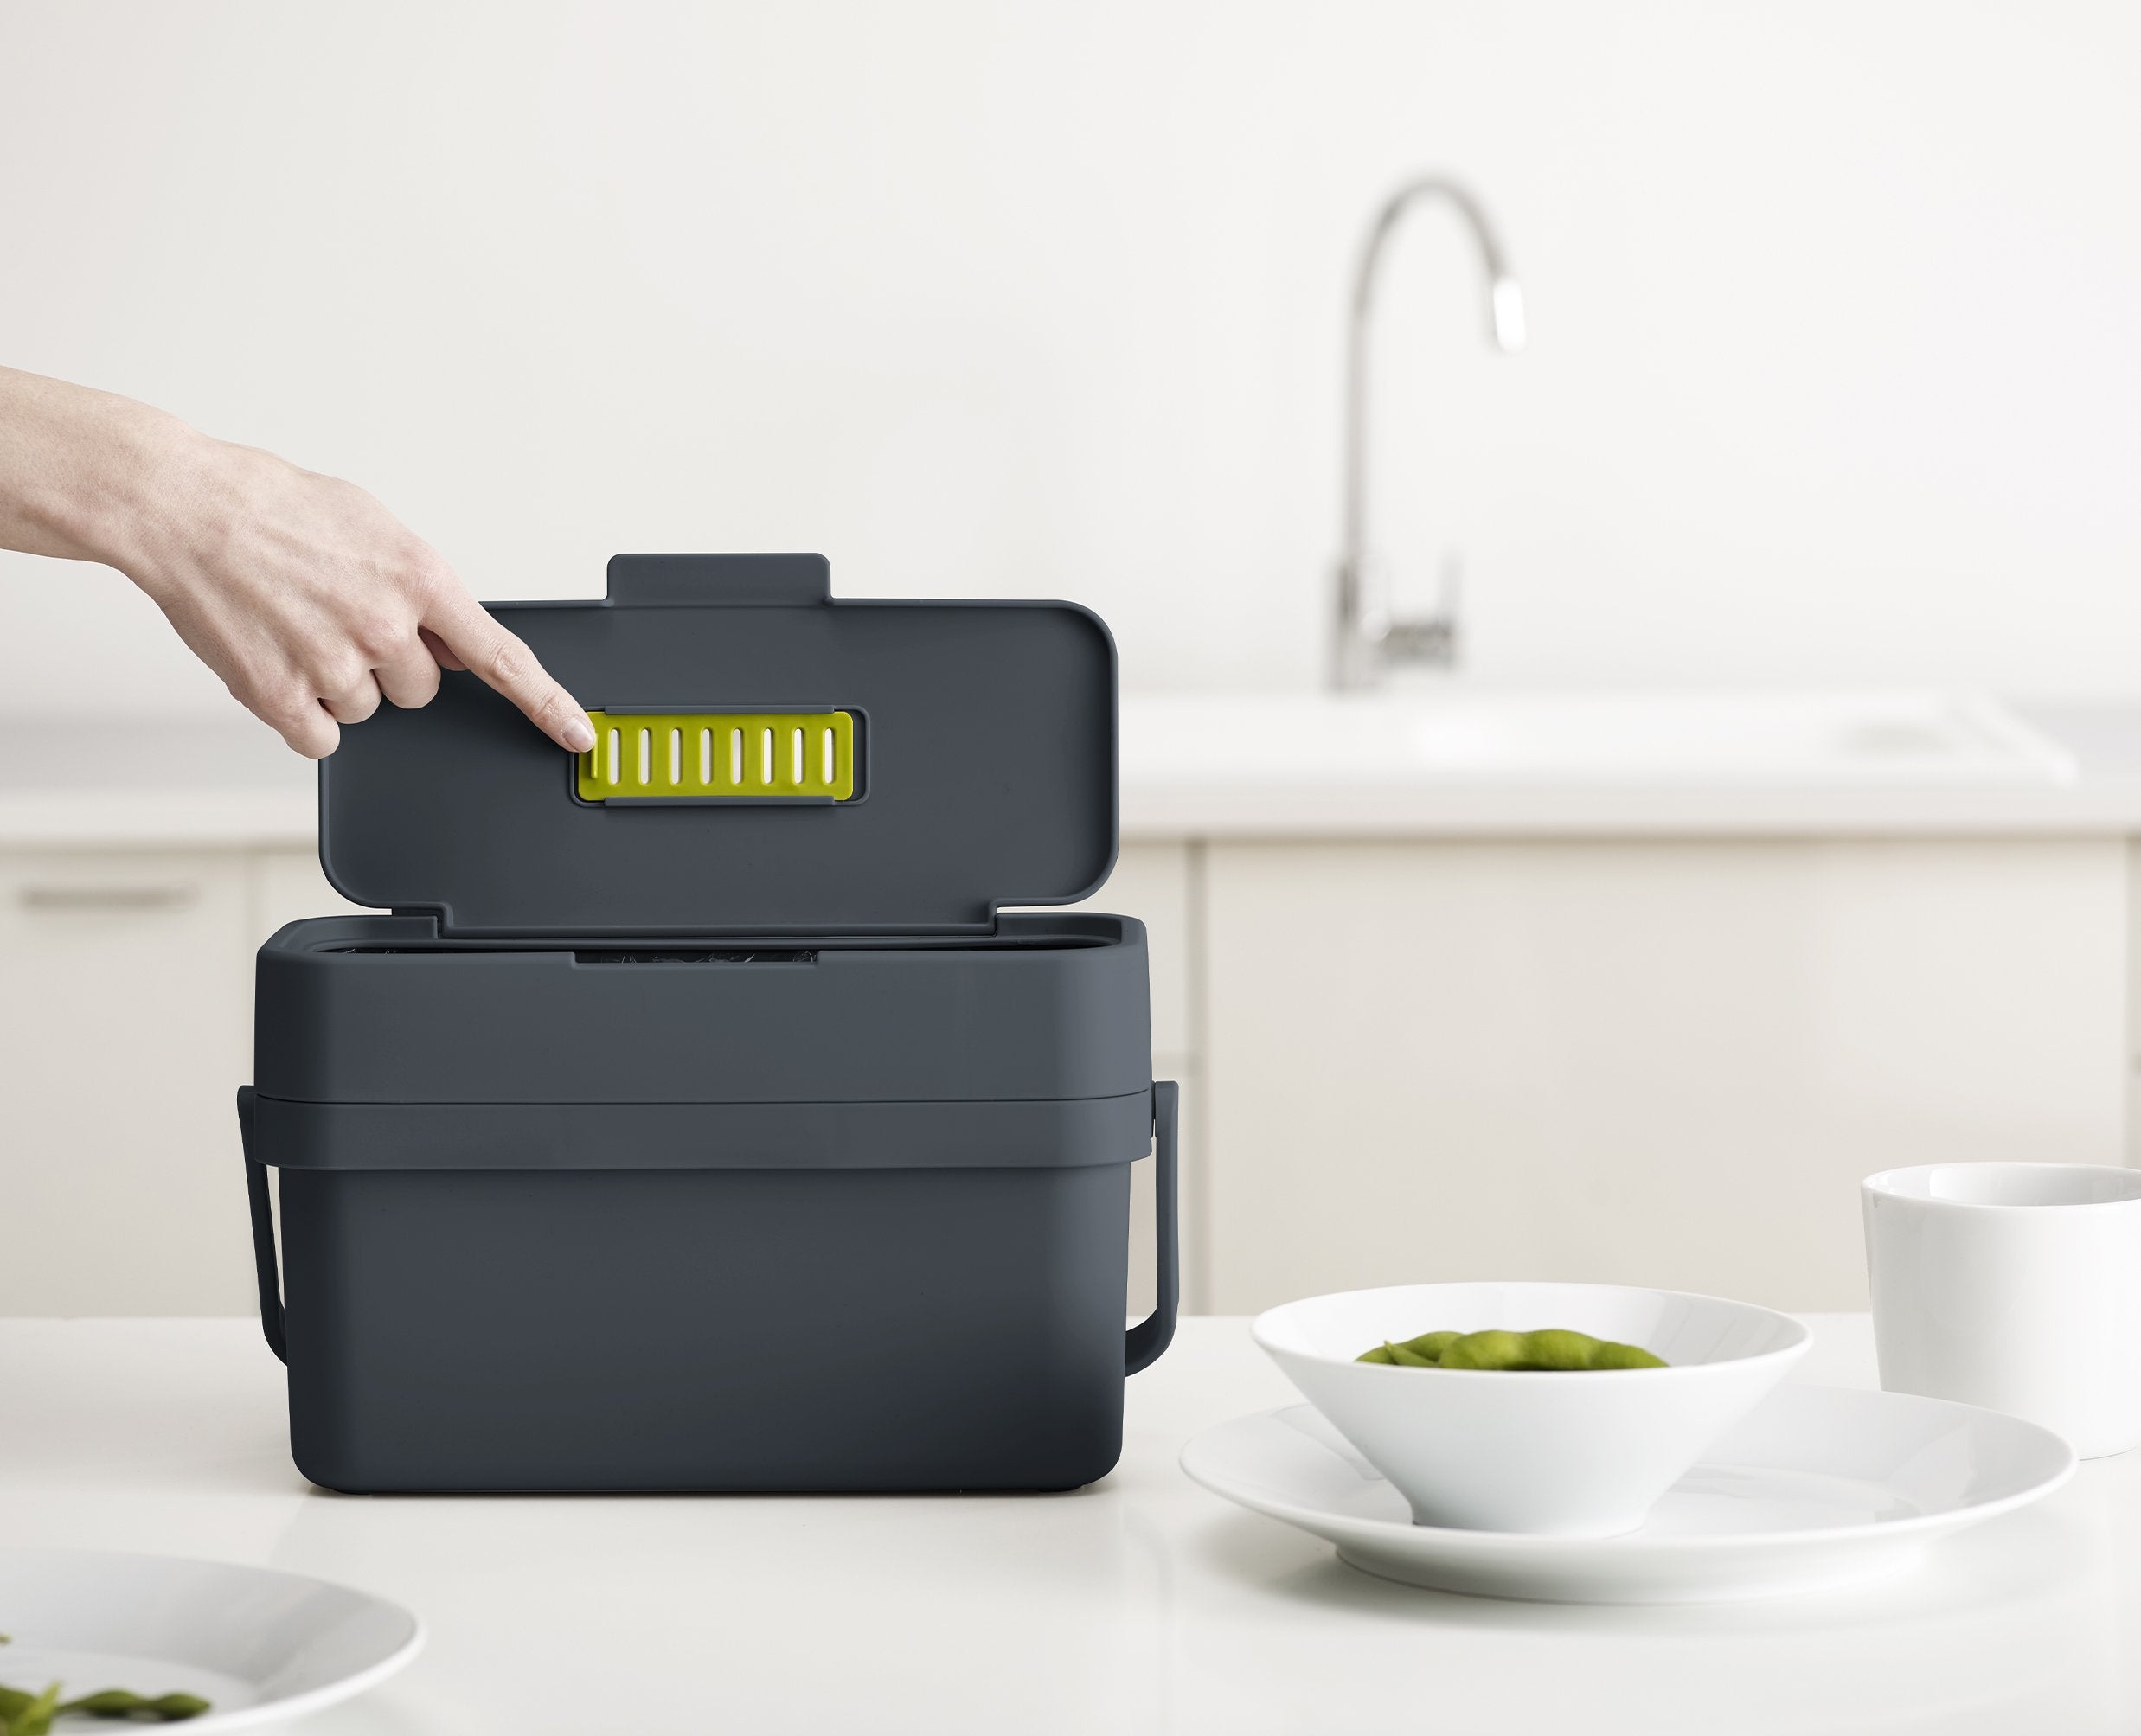 BEON.COM.AU  This slimline food waste caddy is designed to make collecting food scraps easier as it features a convenient flip-up lid and extra wide opening.  Wide aperture makes scraping food from plates easier Adjustable air vent: open - helps reduce moisture and odour build-up; closed - provides insect ba... Joseph Joseph at BEON.COM.AU